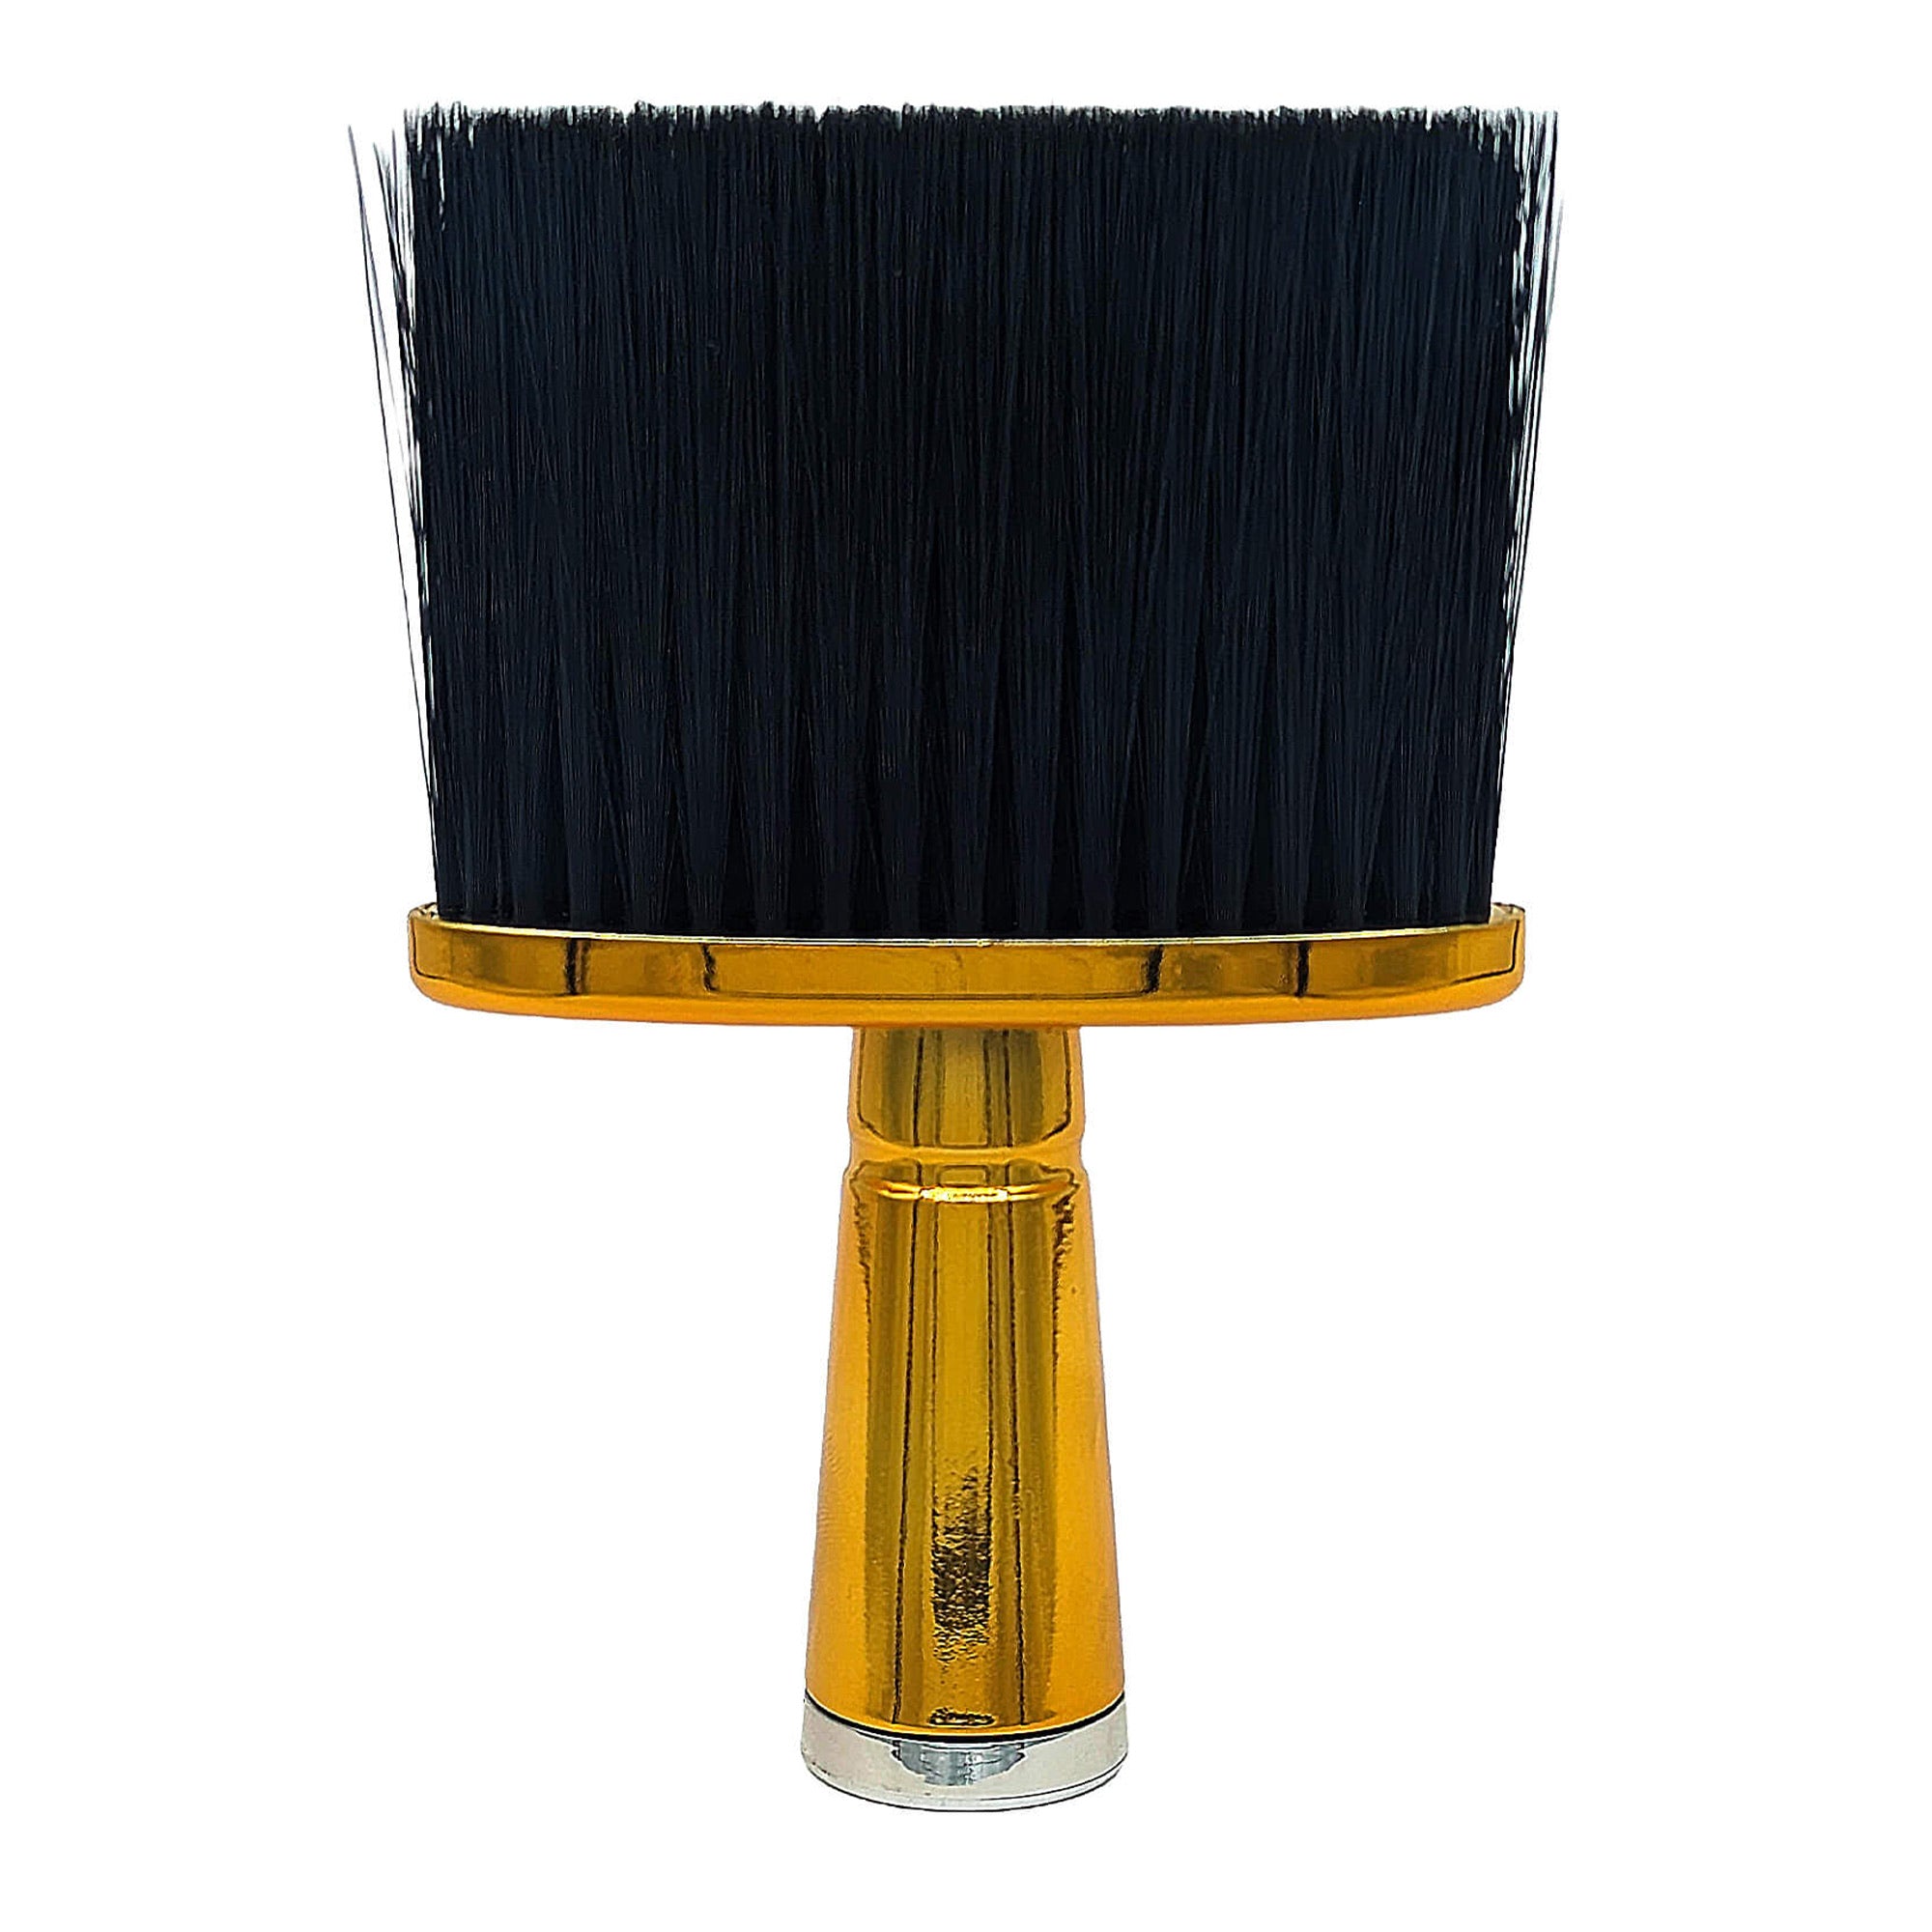 Eson - Neck Duster Brush Ultra-Soft Comfort During Use 15x10cm (Gold) - Eson Direct